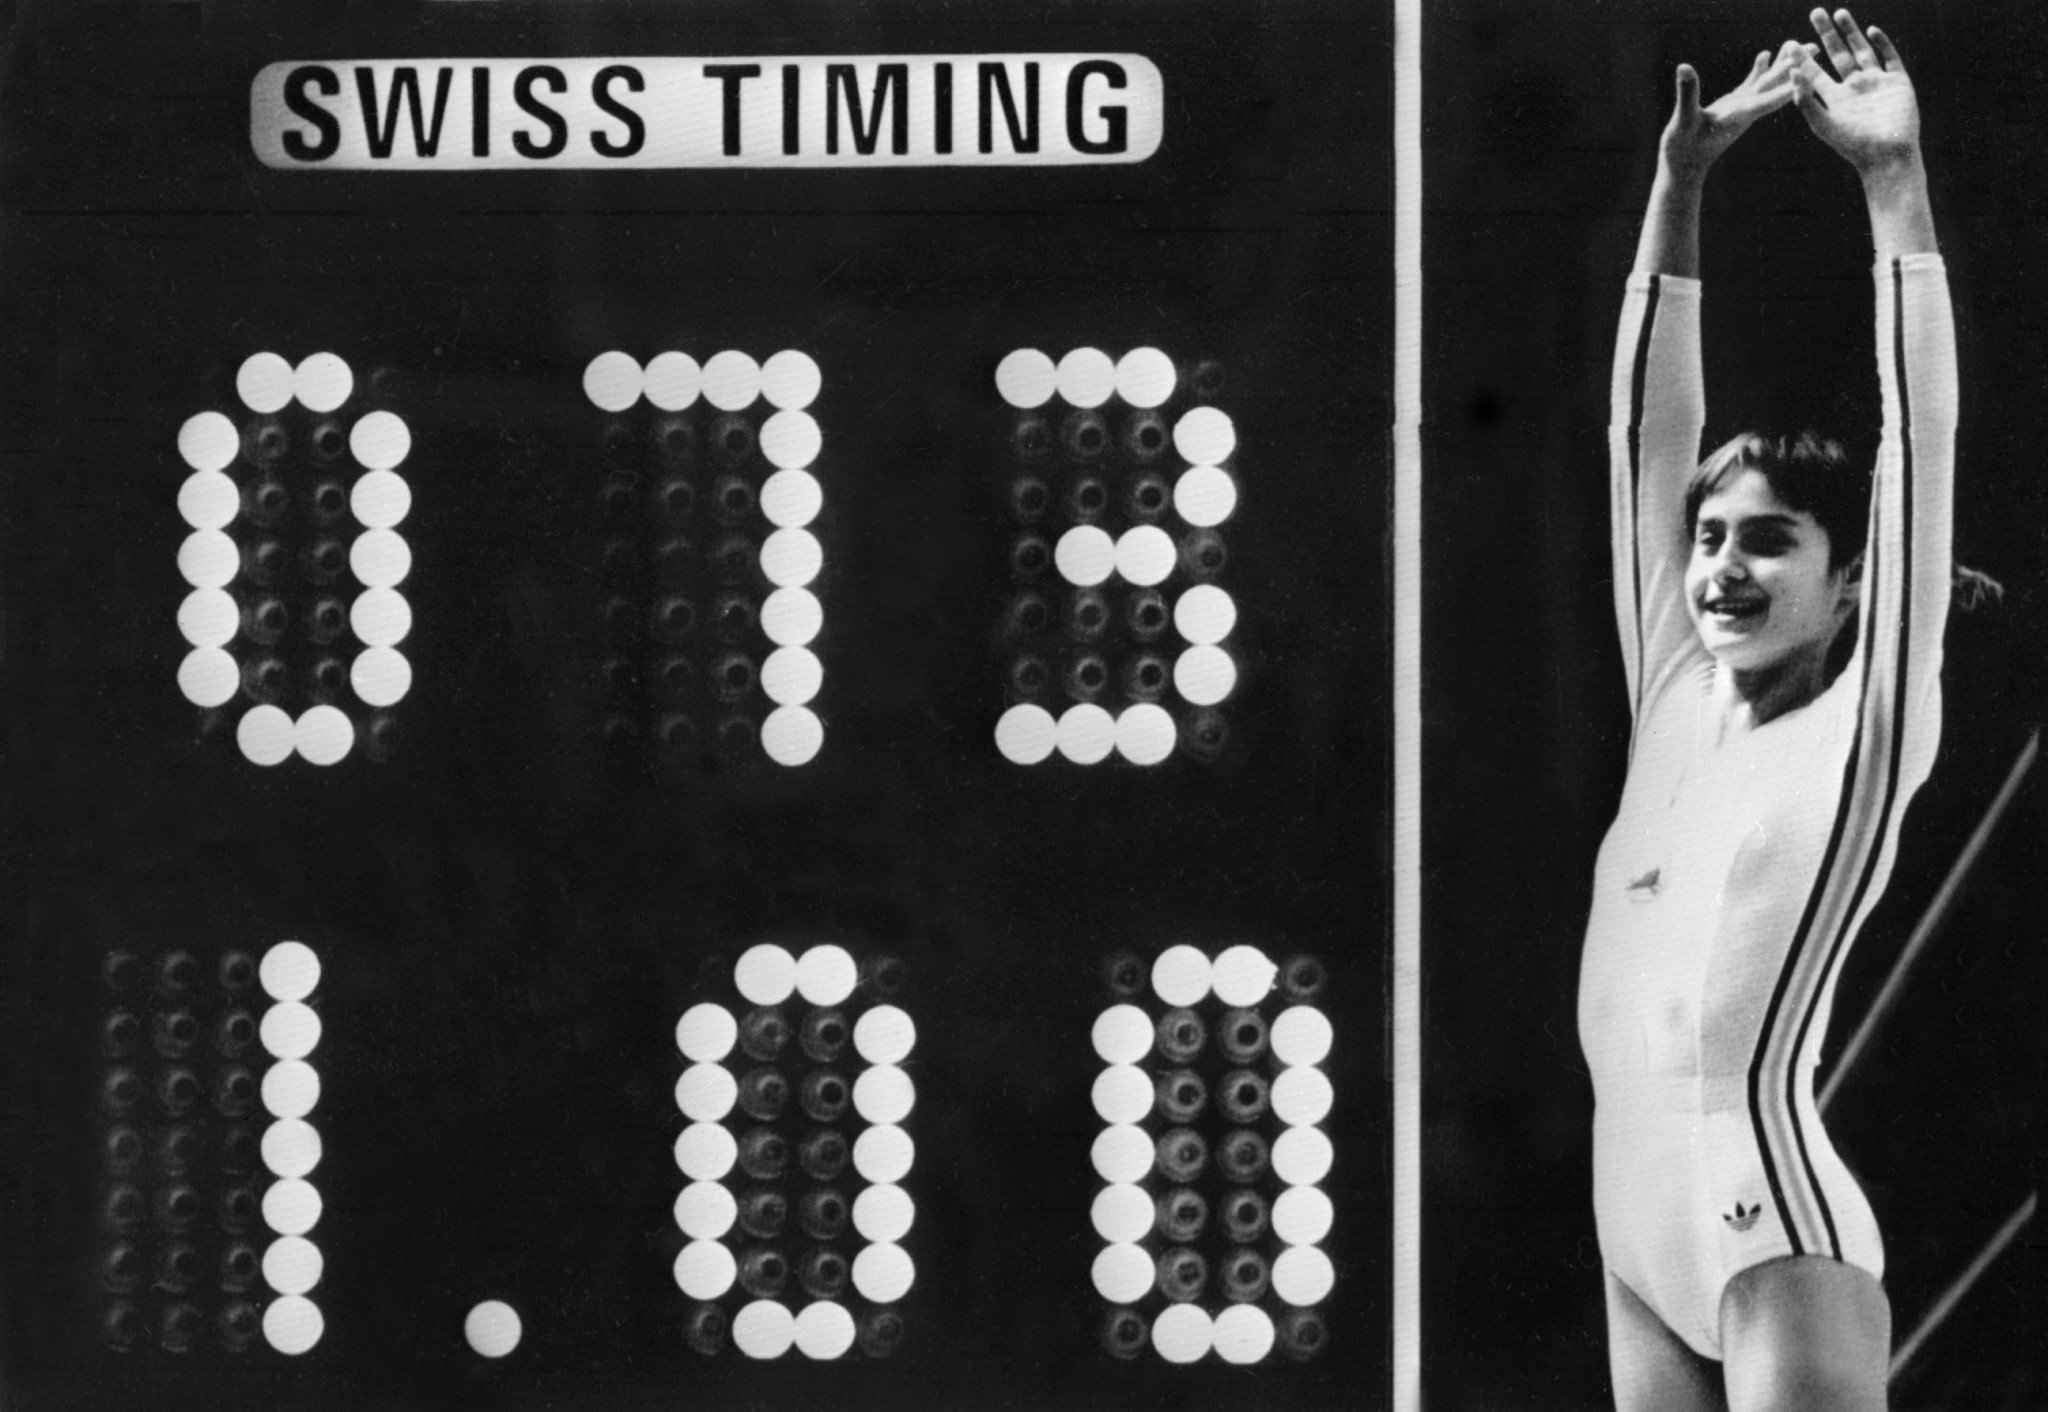 Bruno Grandi oversaw the scrapping of the perfect 10 score, which made a star of Nadia Comăneci ©Getty Images  